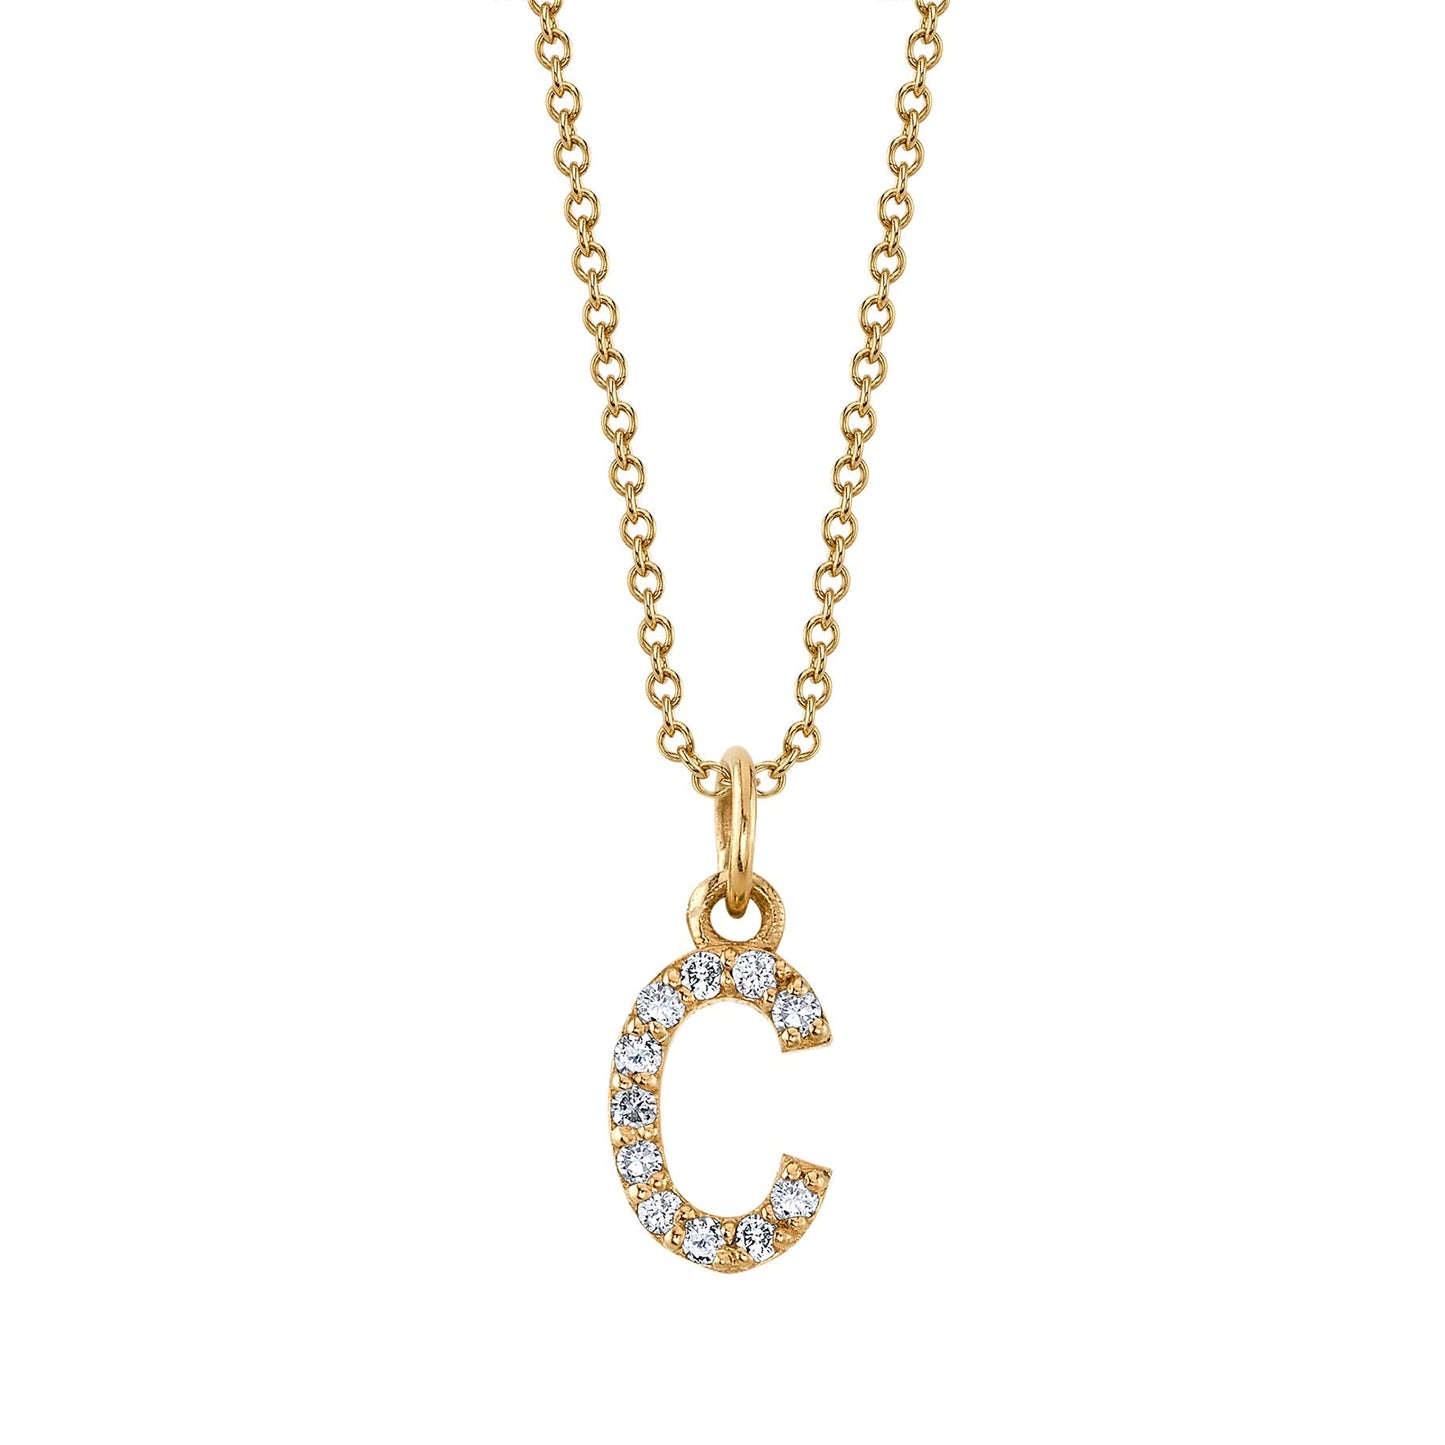 C Initial Birthstone Charm Necklace